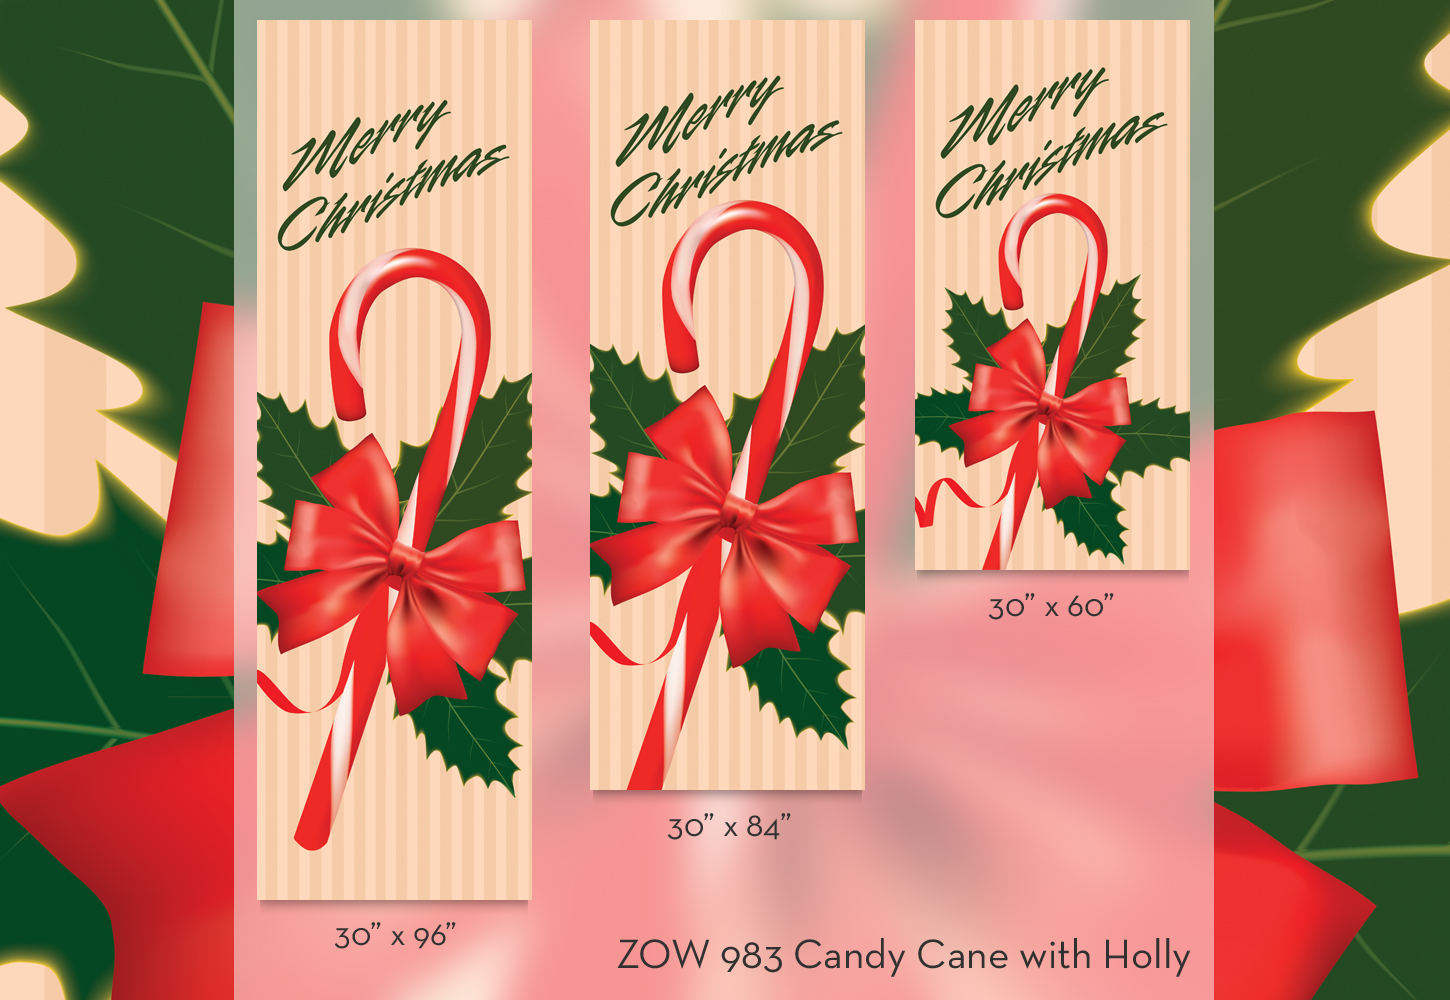 ZOW 983 Candy Cane with Holly